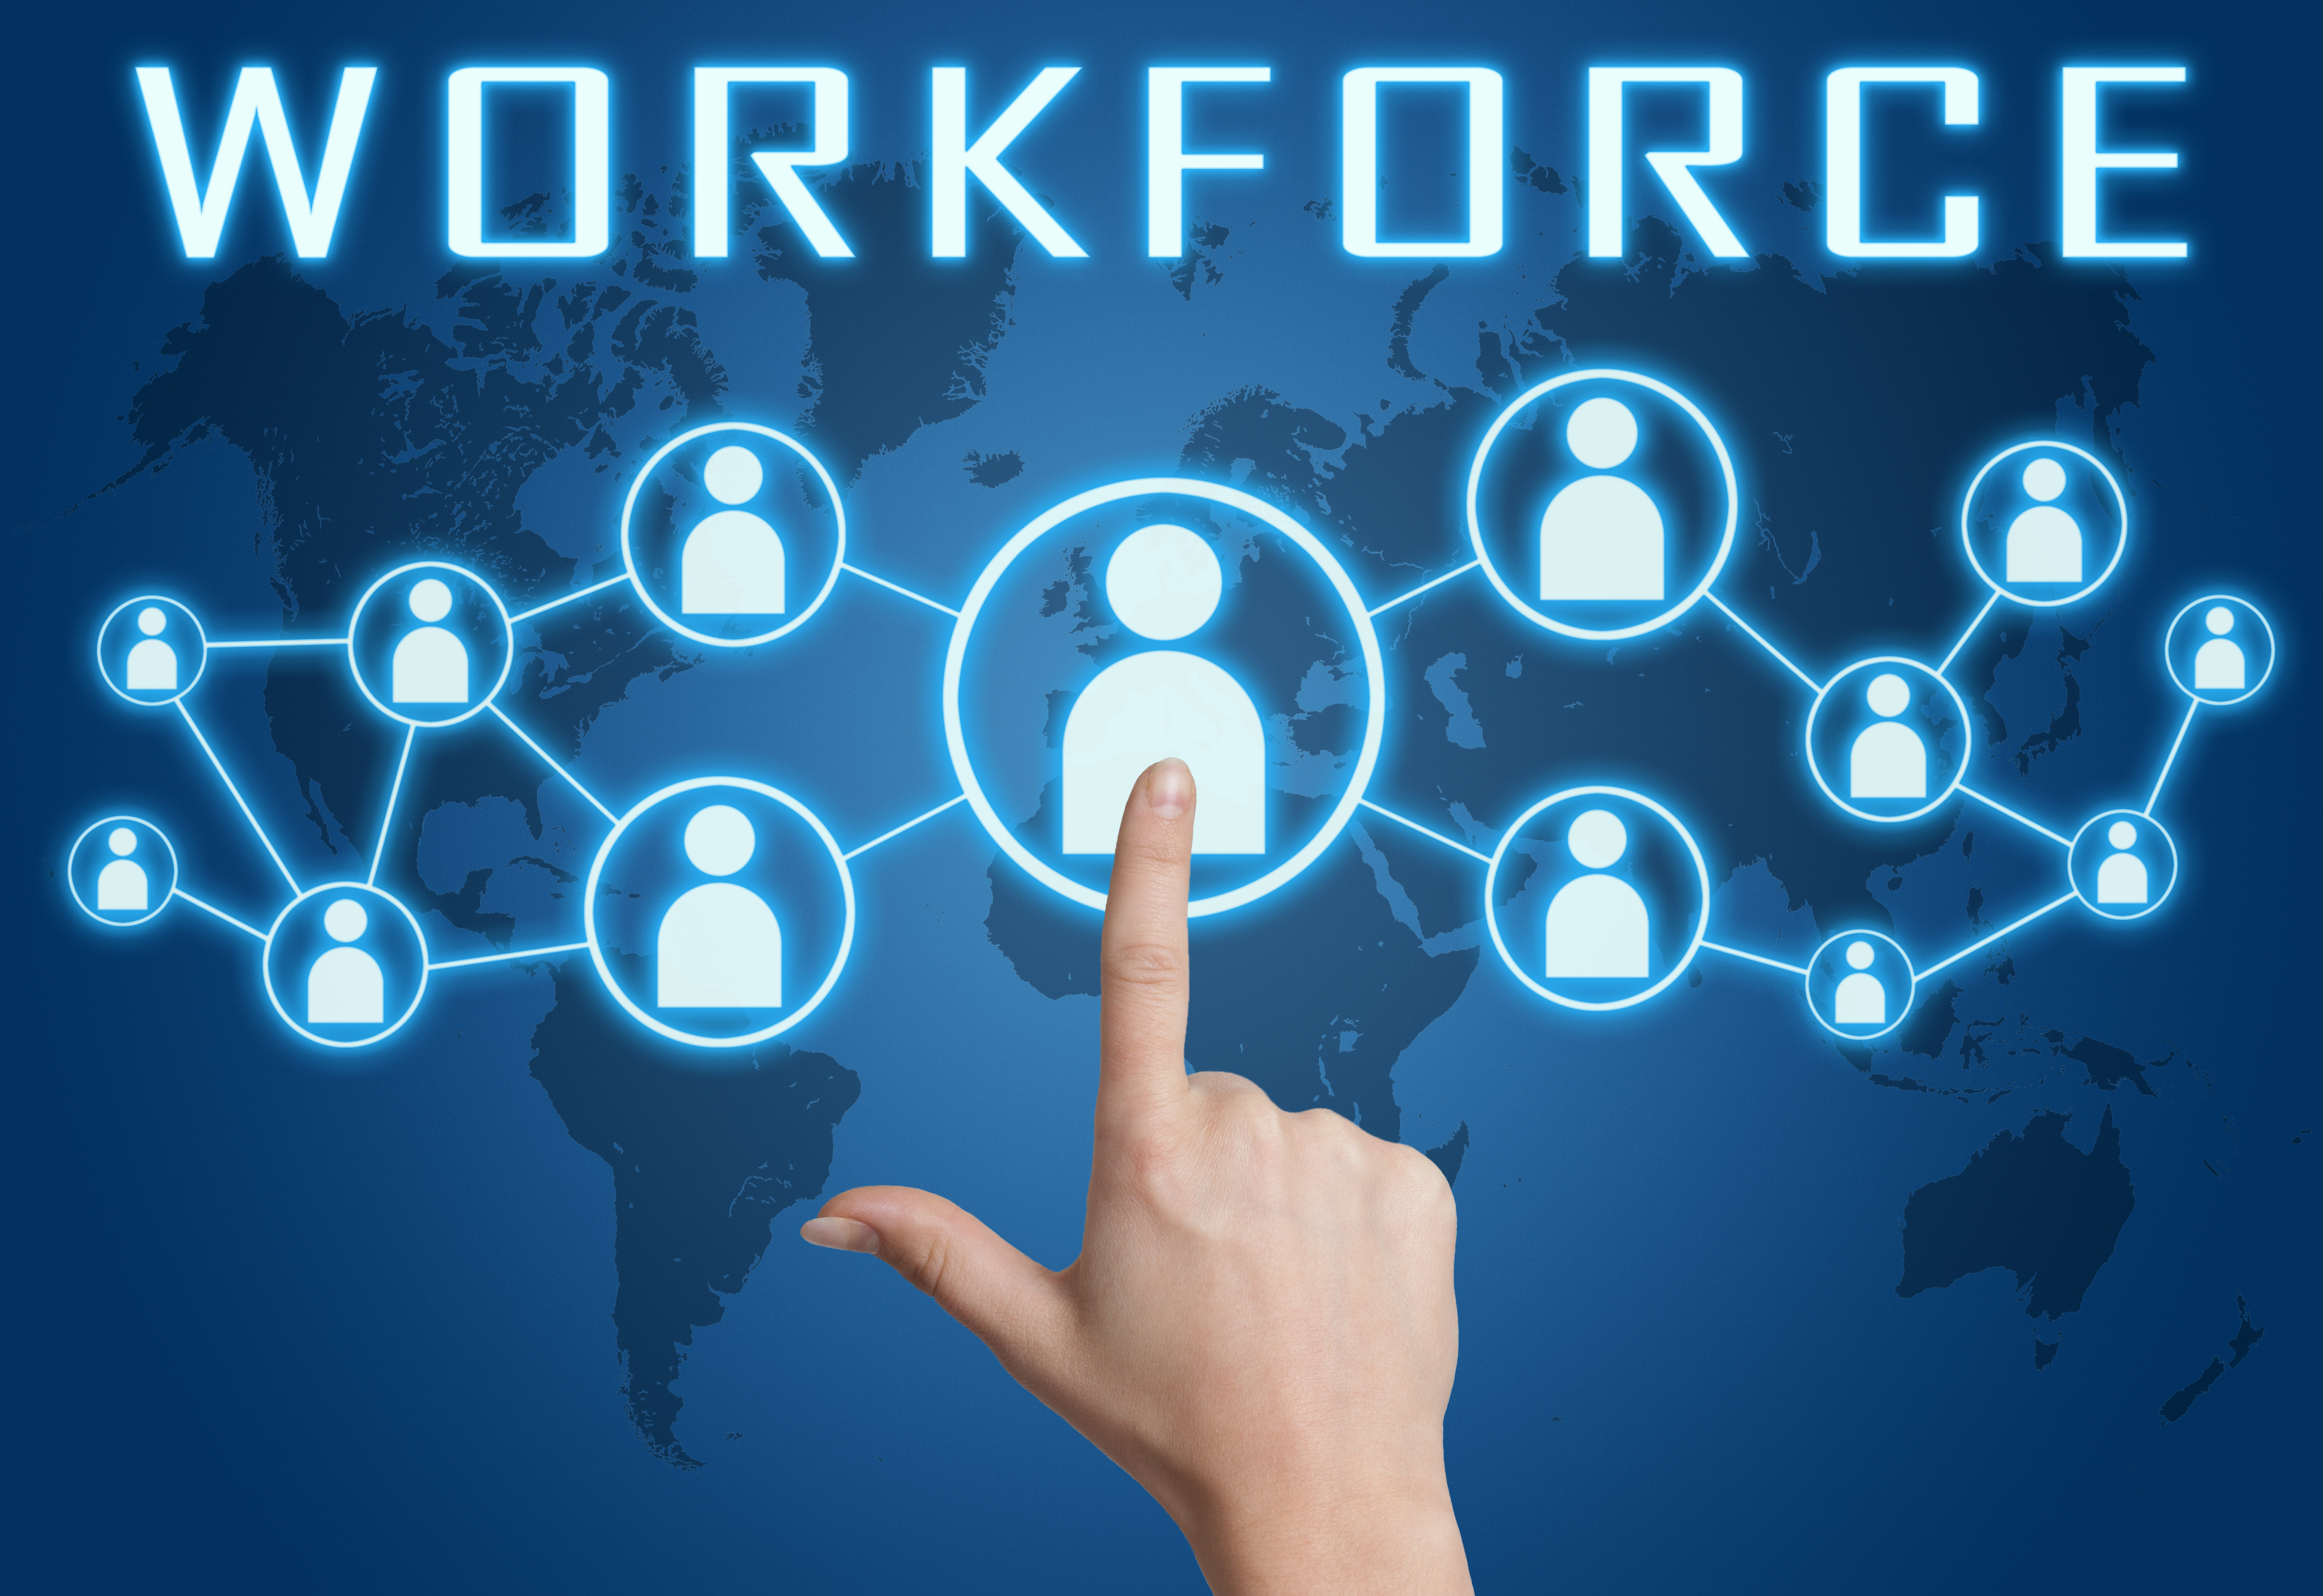 Workforce,Concept,With,Hand,Pressing,Social,Icons,On,Blue,World